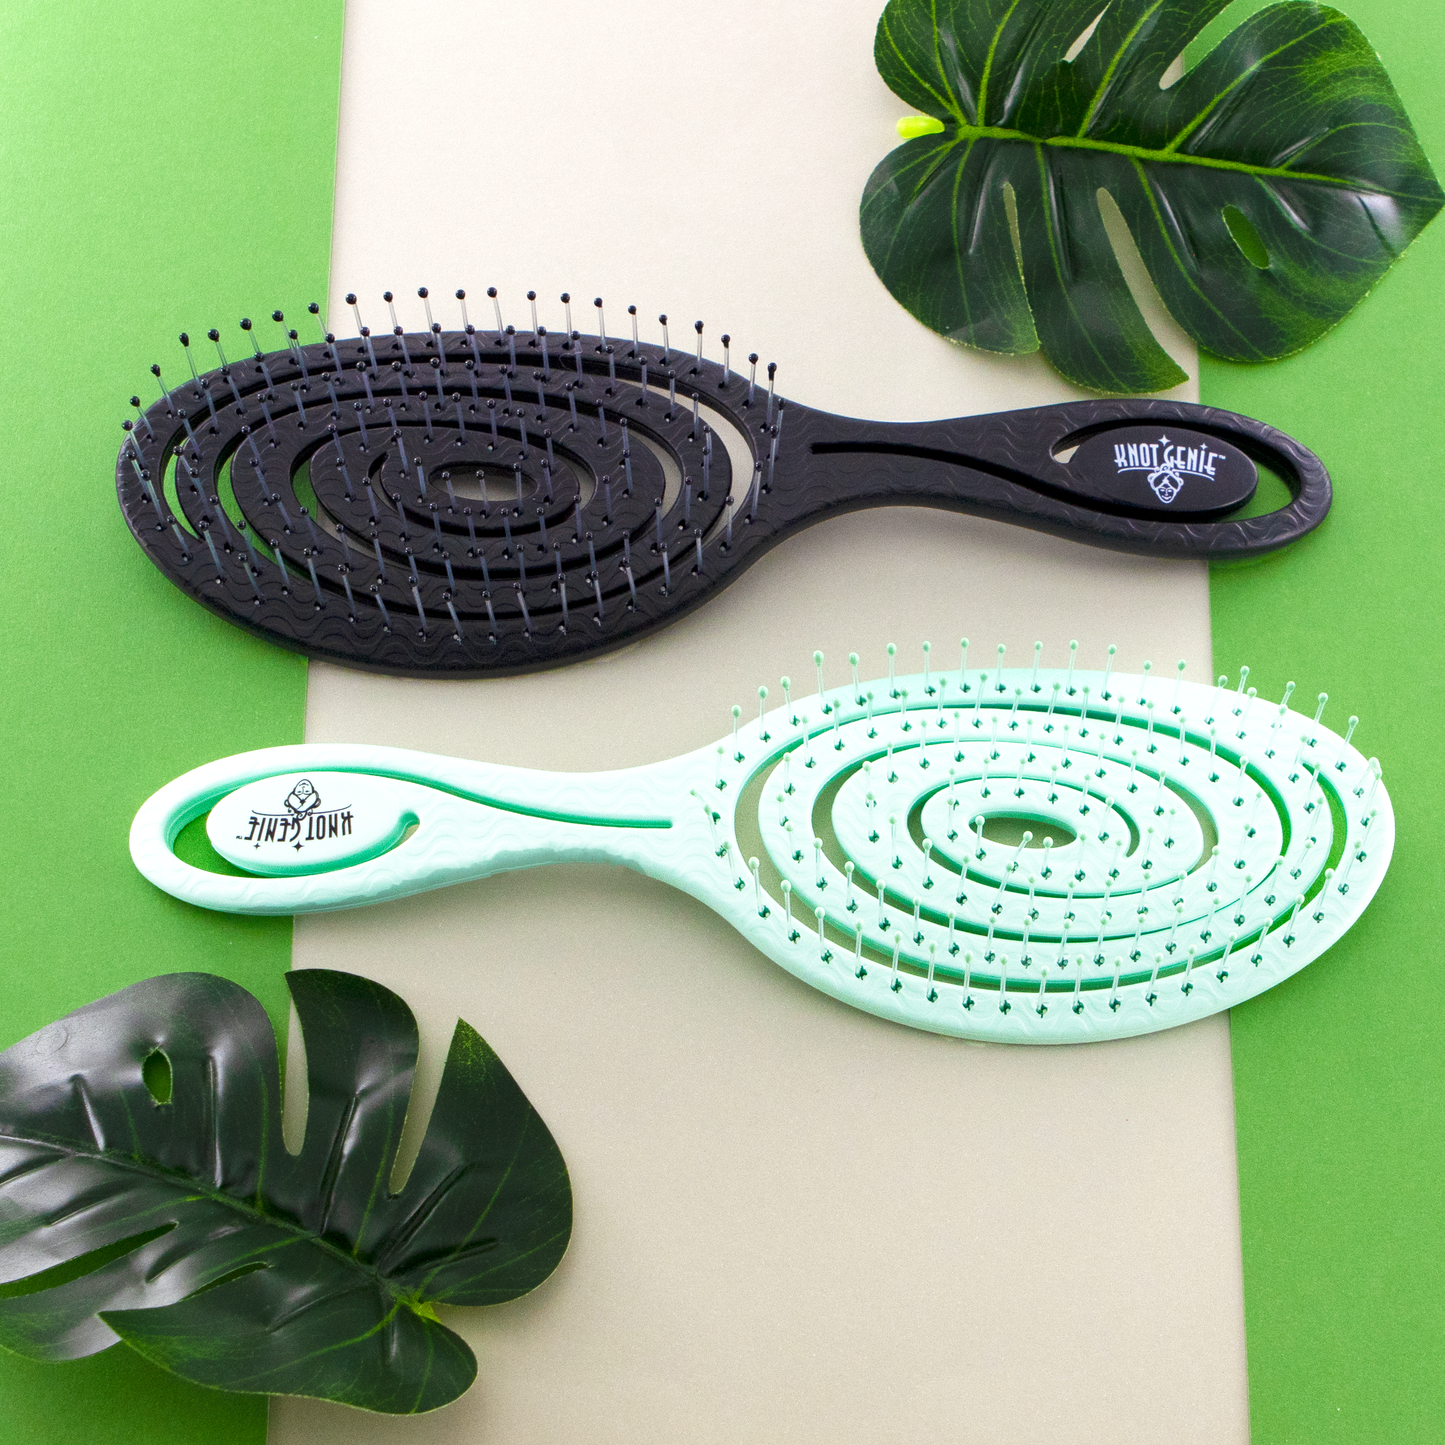 Knot Genie Mother Earth Eco Friendly Detangling Brush